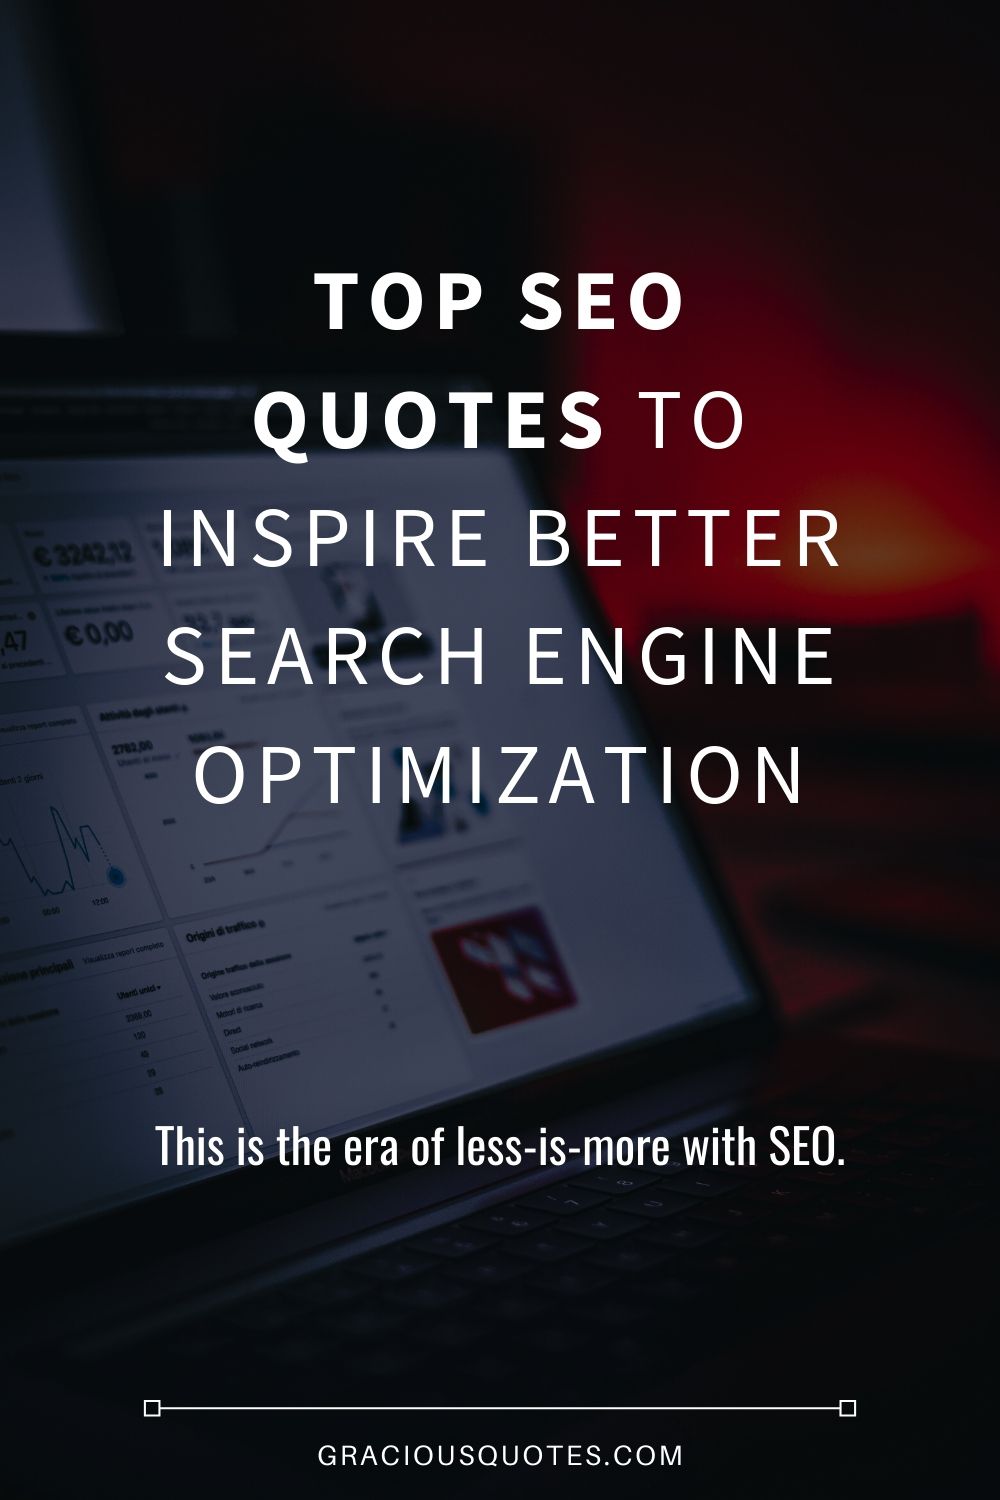 Top-SEO-Quotes-to-Inspire-Better-Search-Engine-Optimization-Gracious-Quotes